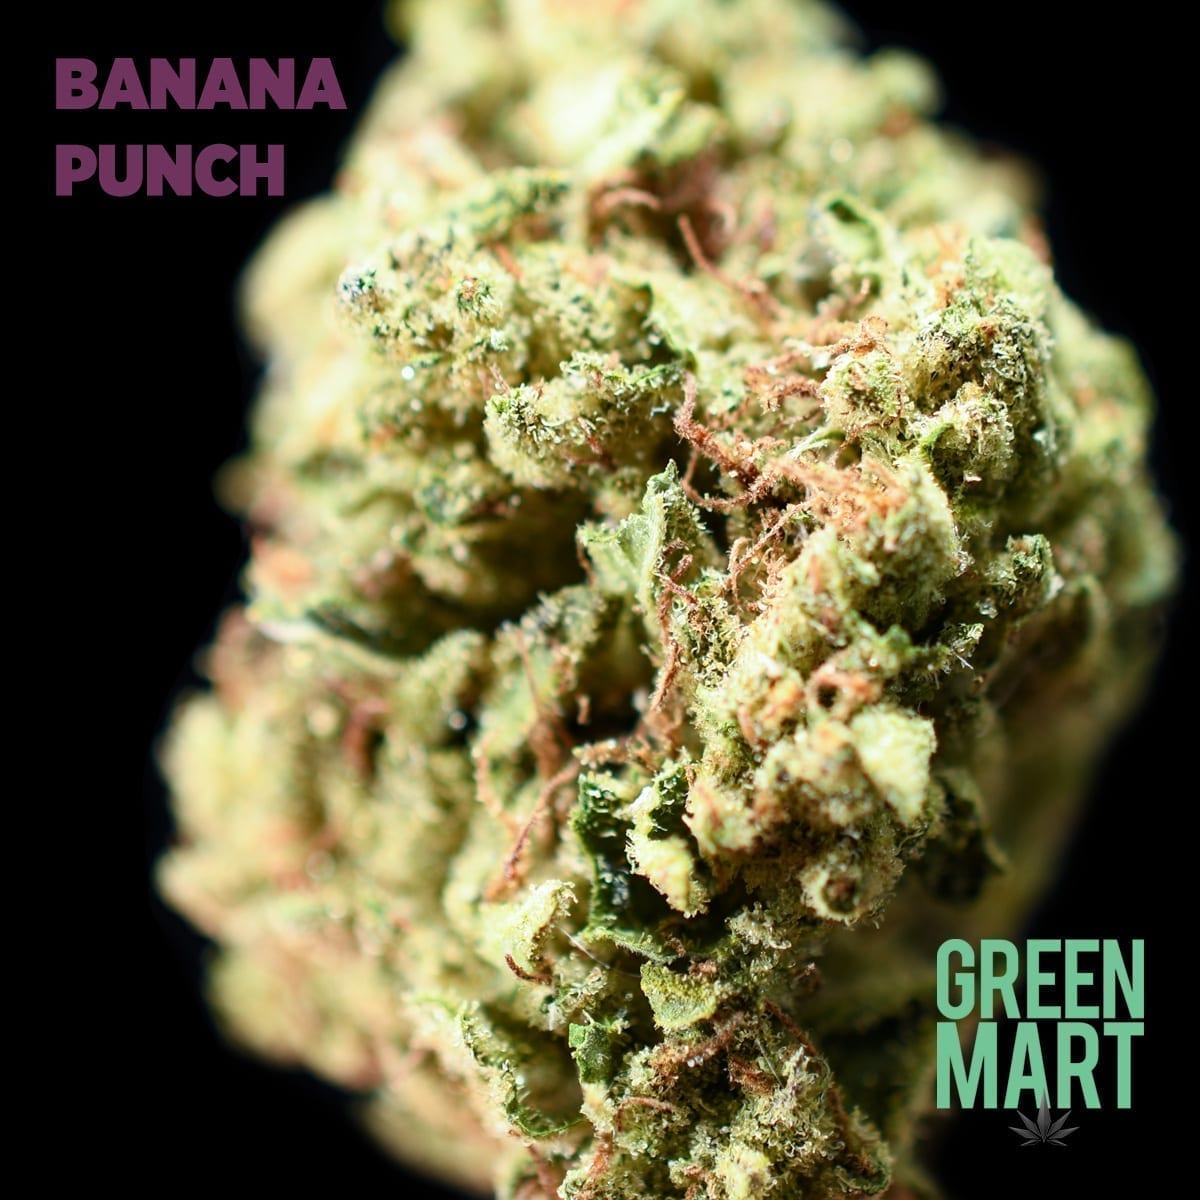 Banana Punch by Dank Brothers